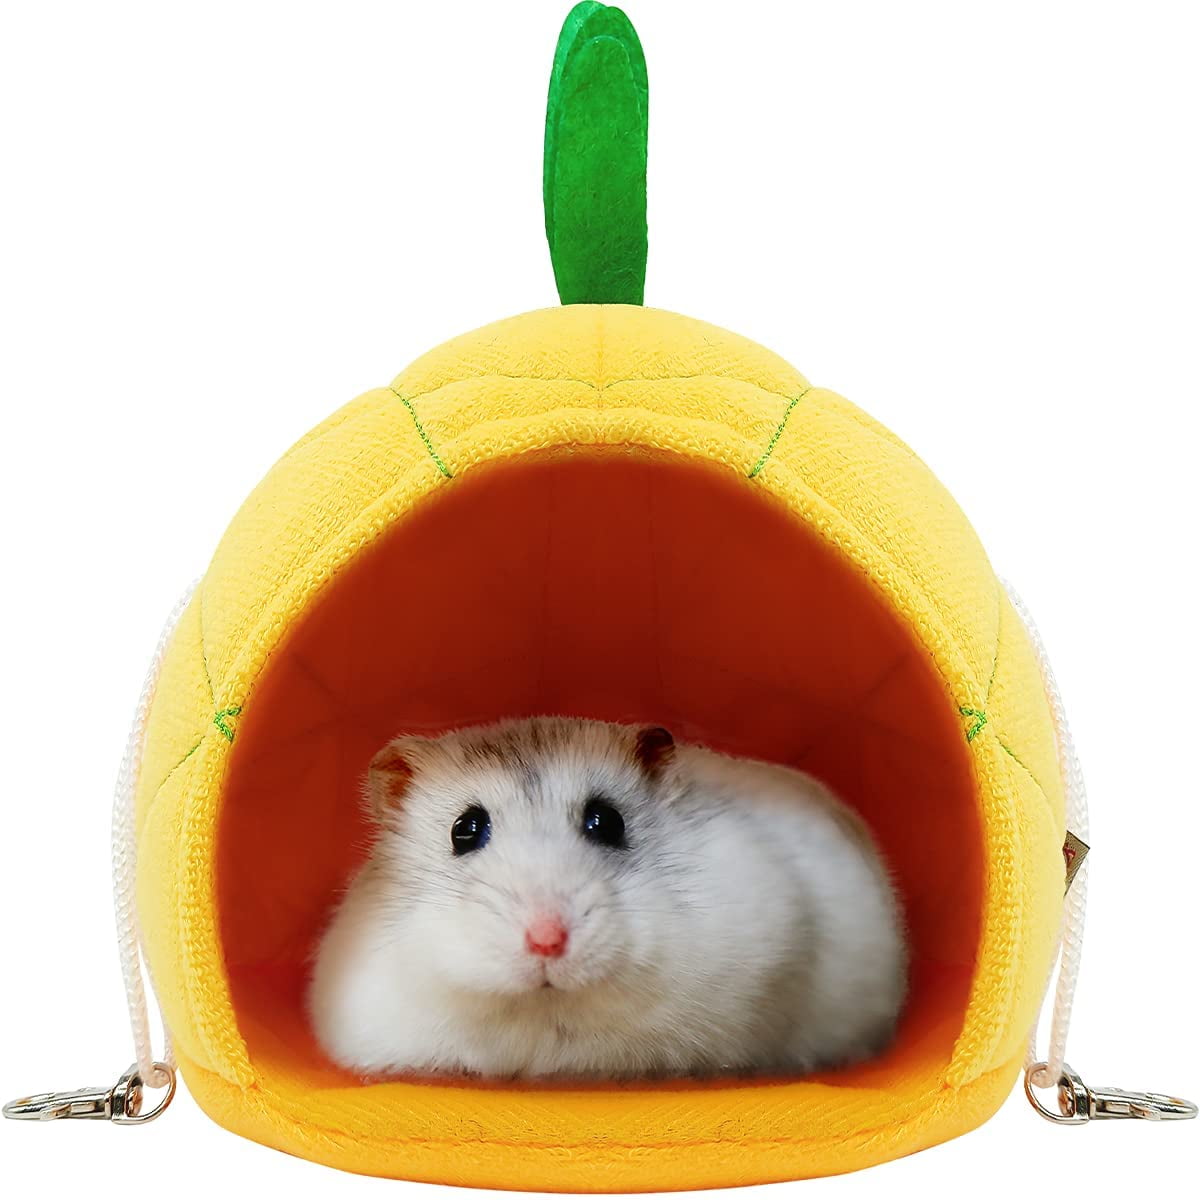 Cute Warm Bed Animal Squirrel Parrot Hanging Nest Pet Hamster Cage House 